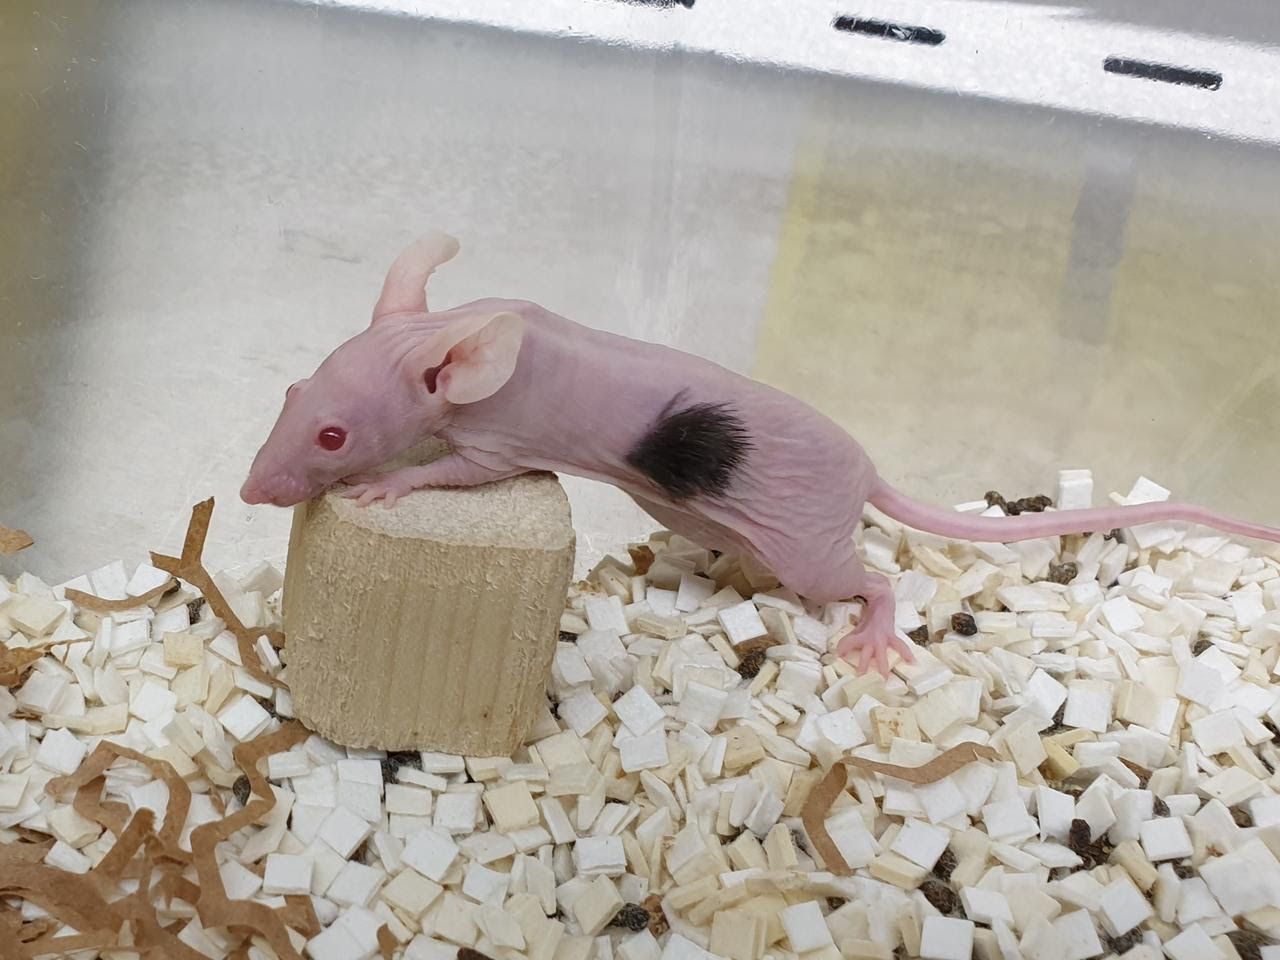 A lab mouse seven months after receiving dNovo's stem cell treatment to promote hair regrowth